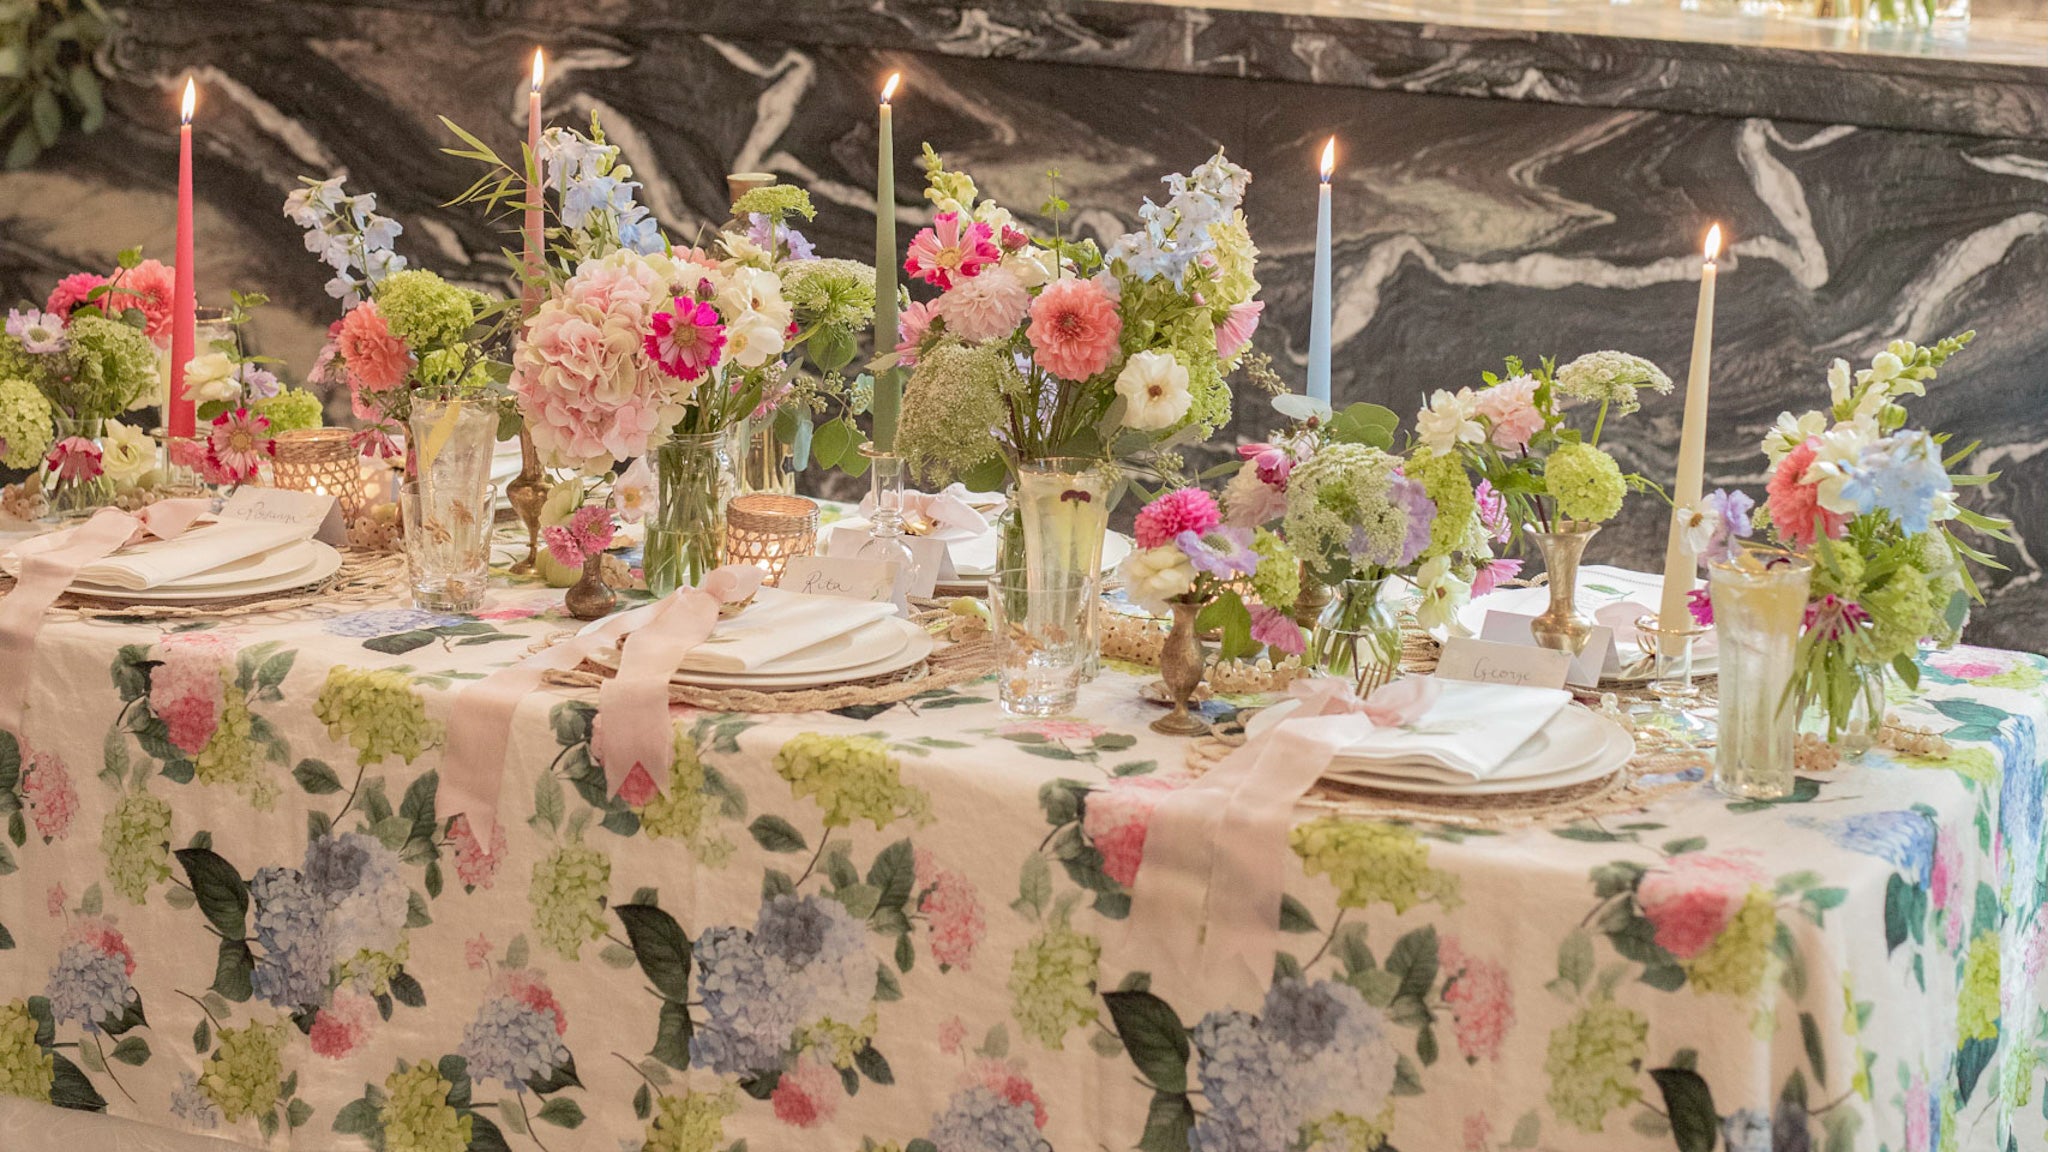 Late summer florals tablescape by Rosanna Falconer